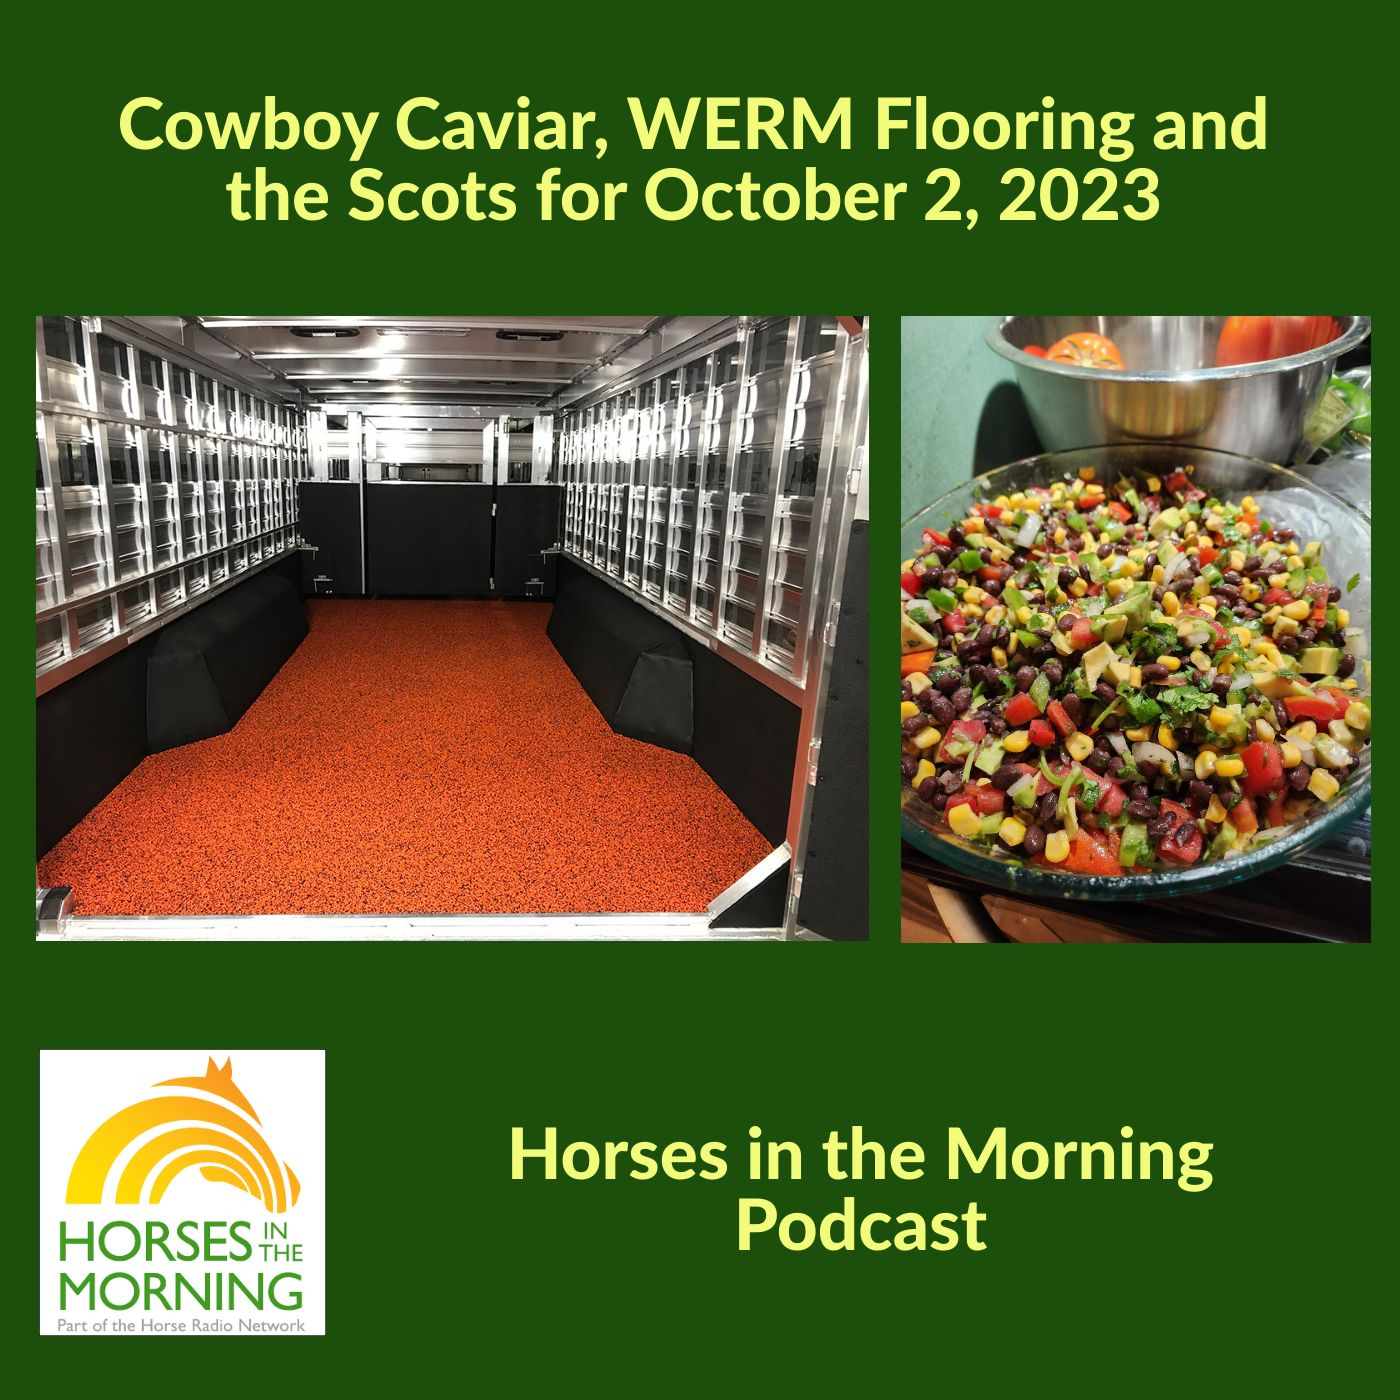 Cowboy Caviar, WERM Flooring and the Scots for October 2, 2023